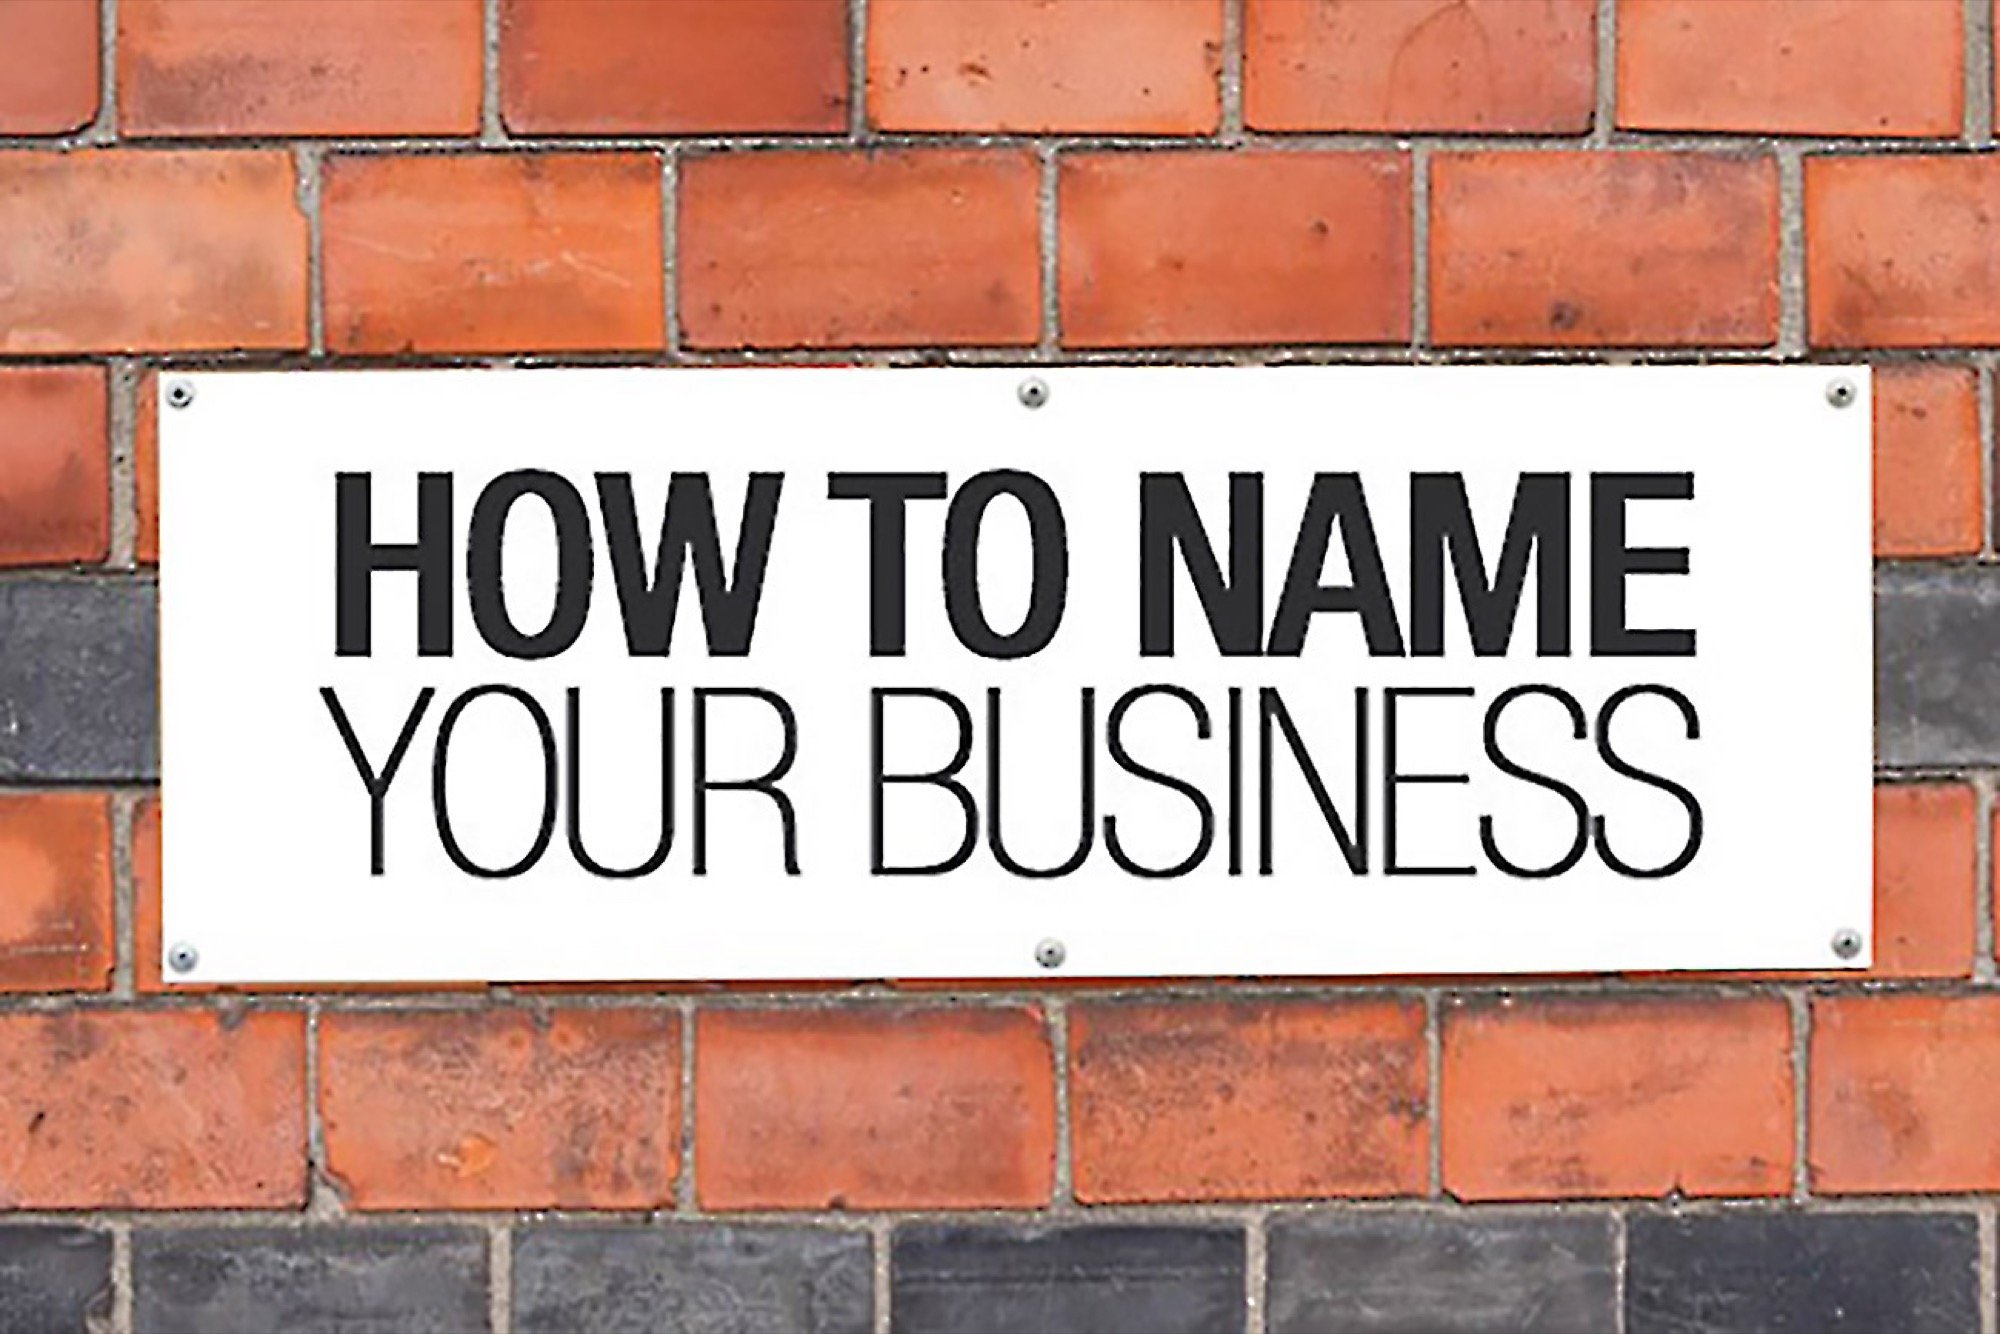 Methods for Obtaining a Business Name